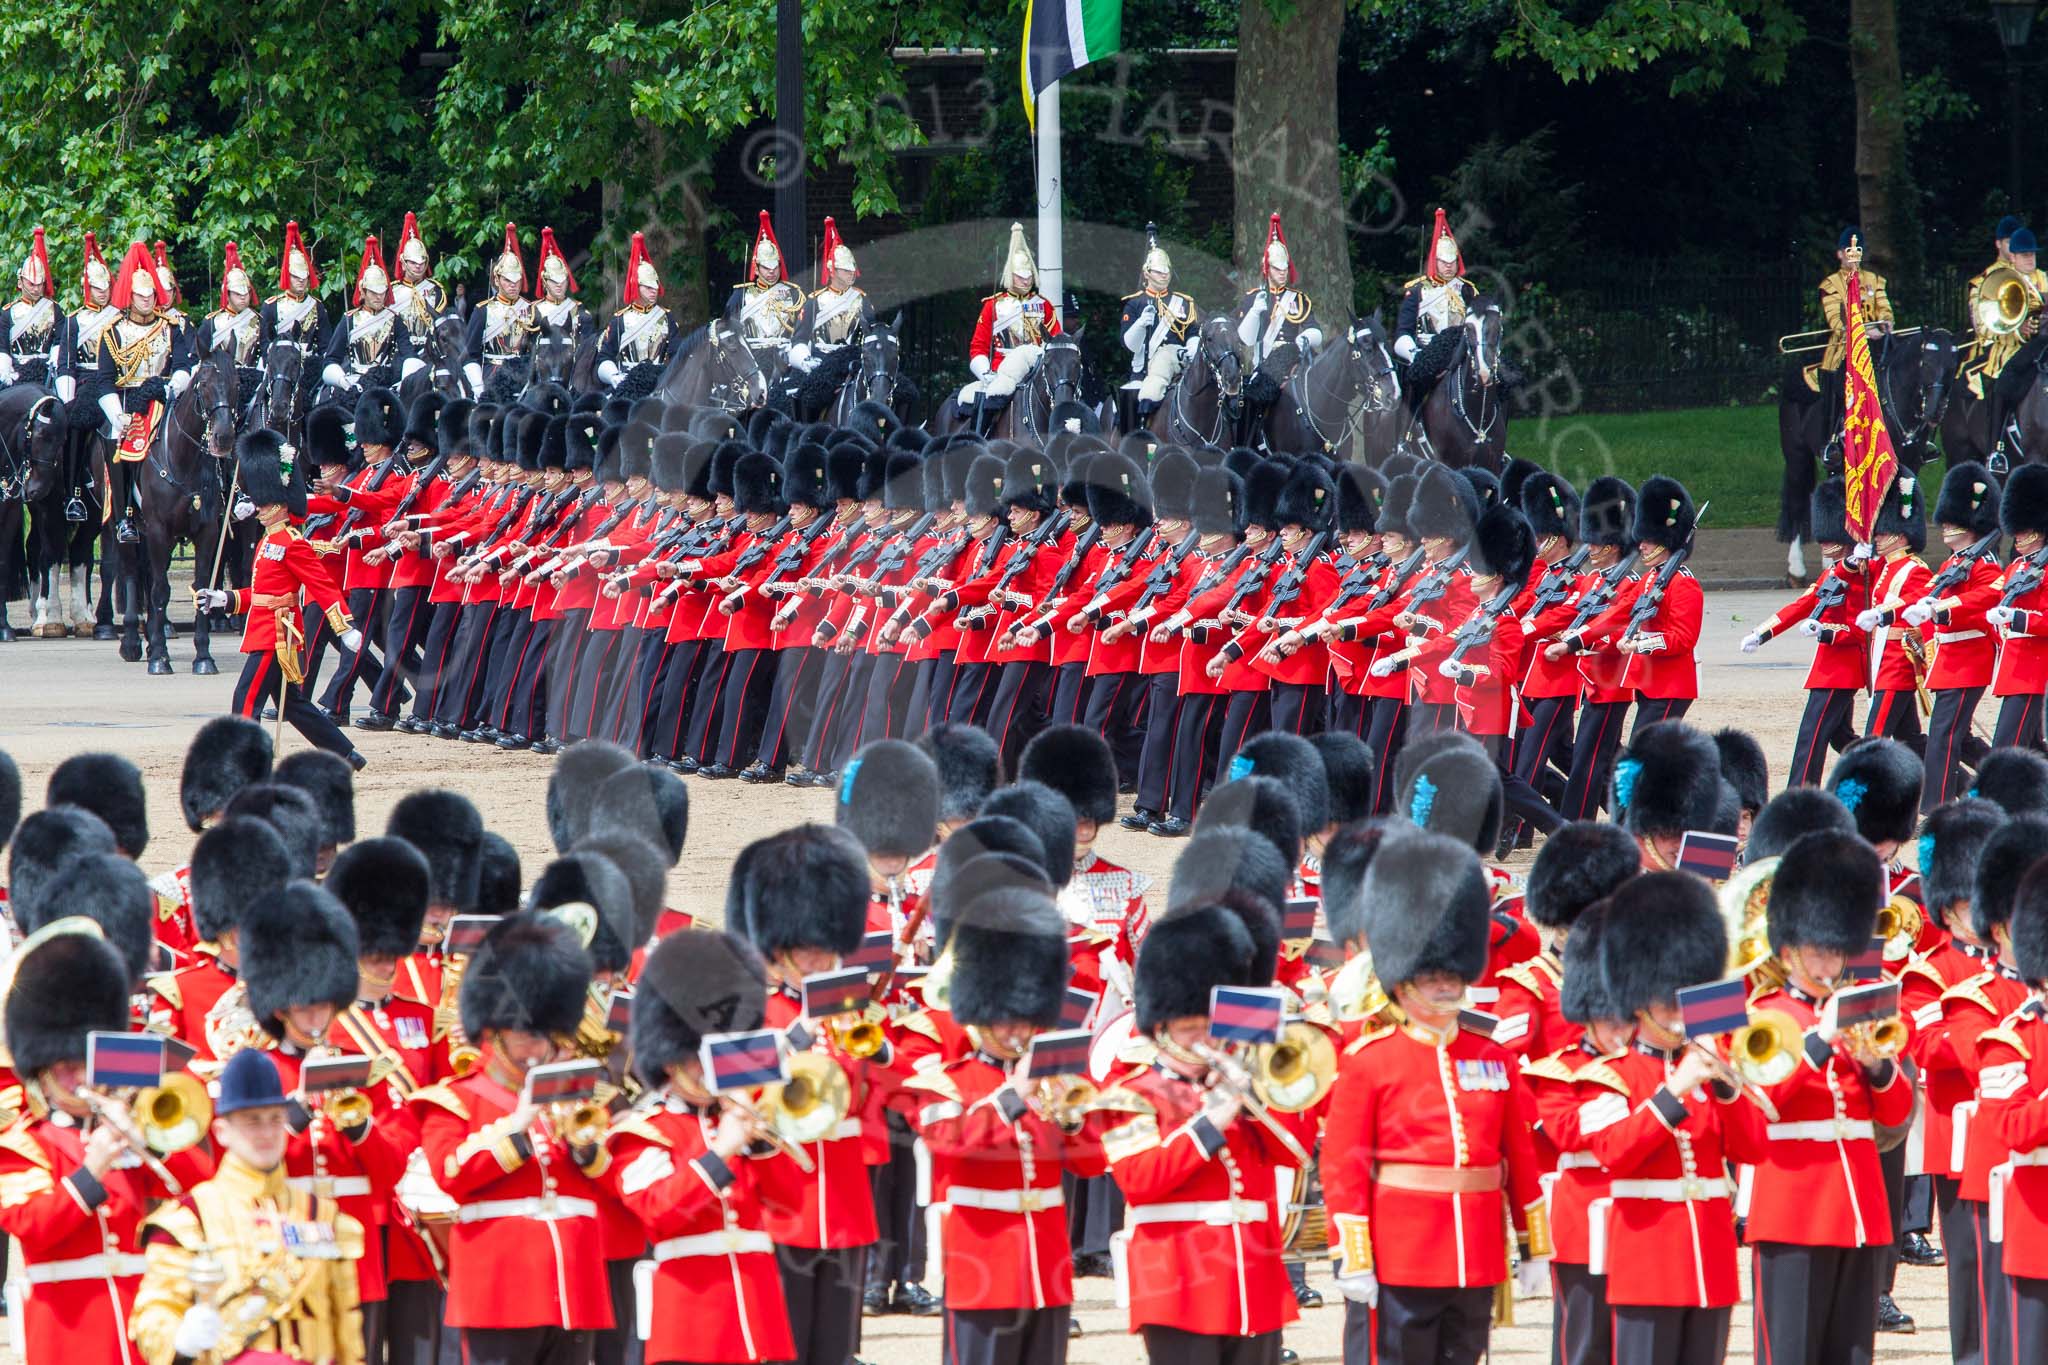 Trooping the Colour 2013: The March Past in Quick Time. The guards are marching beween the Massed Bands, in front, and the Blues and Royals behind them. Image #620, 15 June 2013 11:48 Horse Guards Parade, London, UK